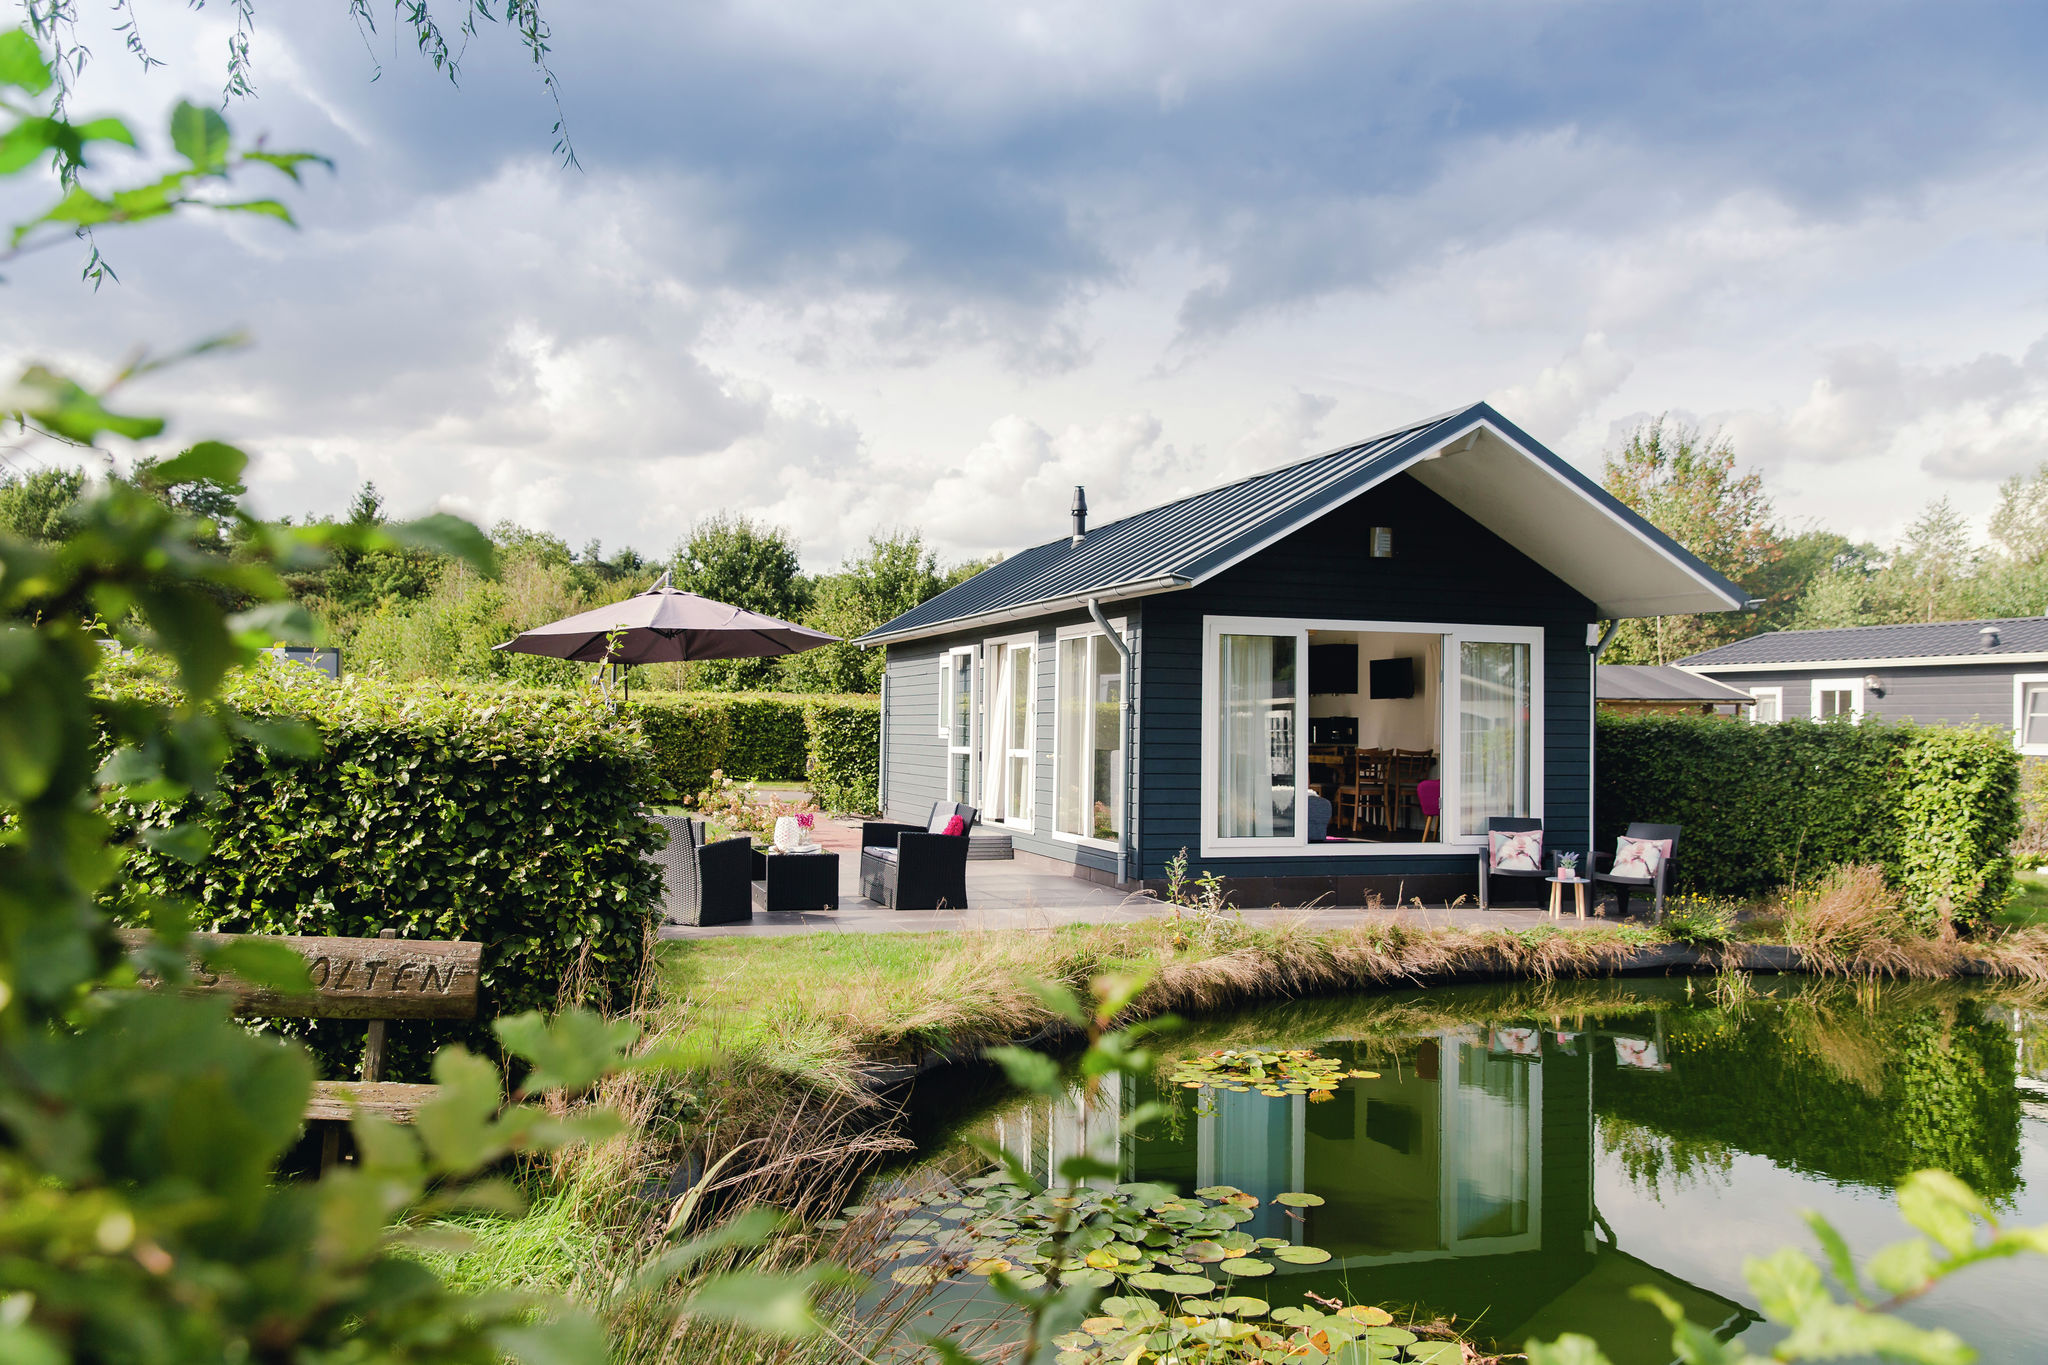 Beautiful chalet in a holiday park by a pond